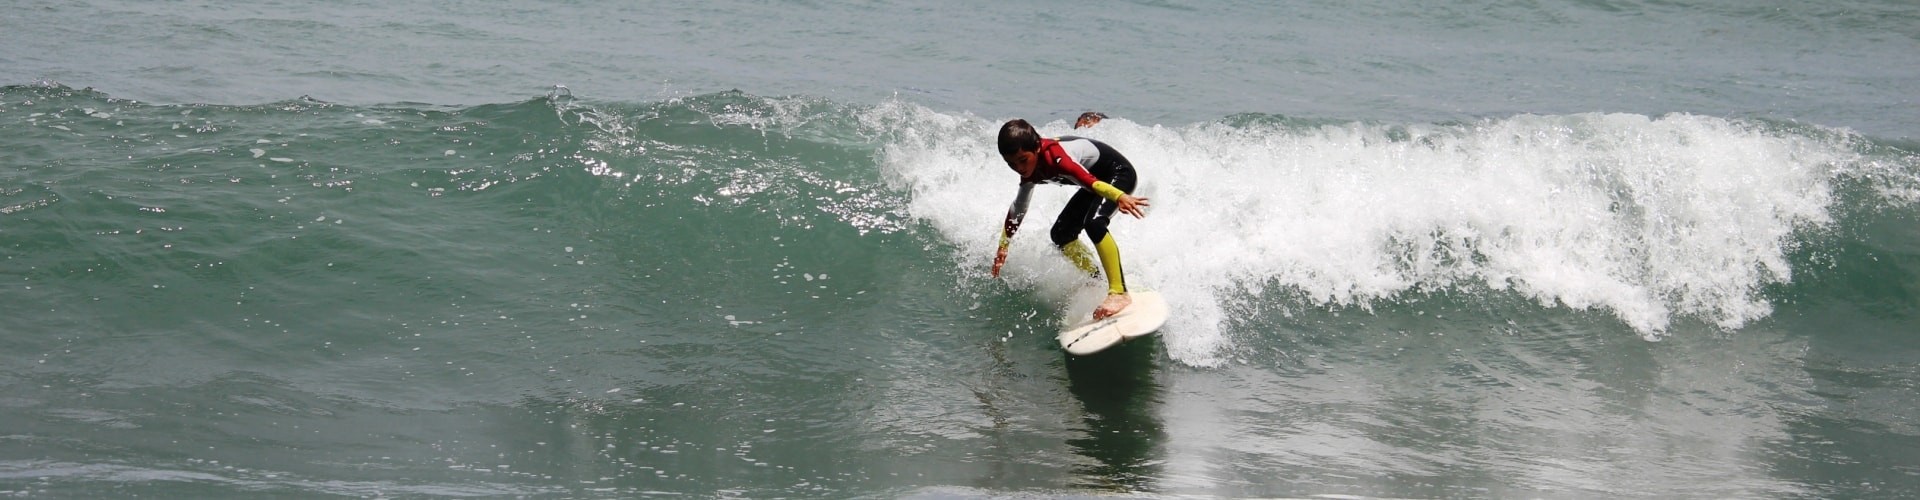 Surf Experiences in Madeira Island